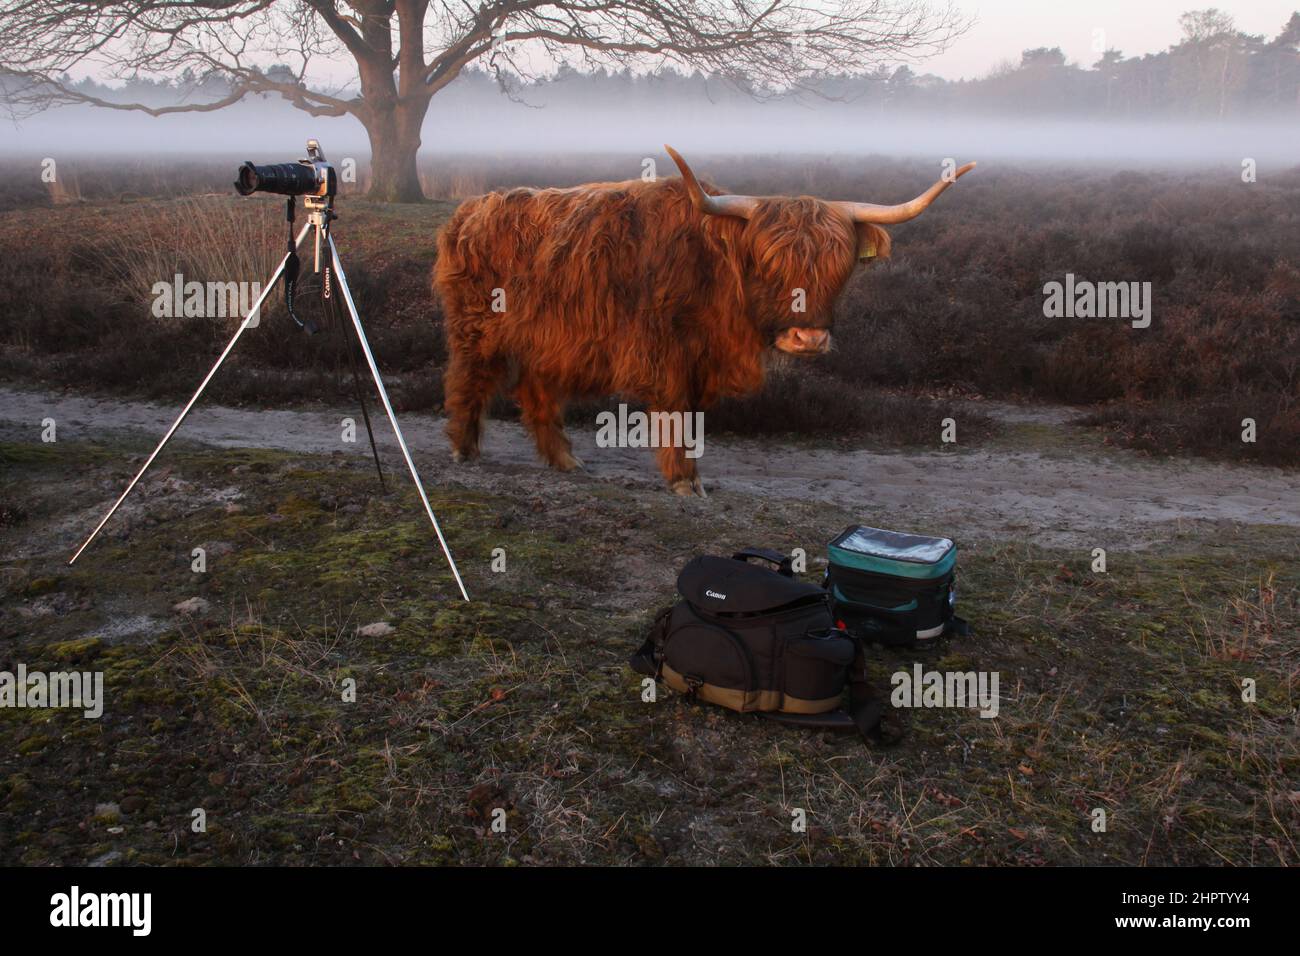 A Scottish highlander walks curiously to the camera bags in a misty moorland landscape. Stock Photo